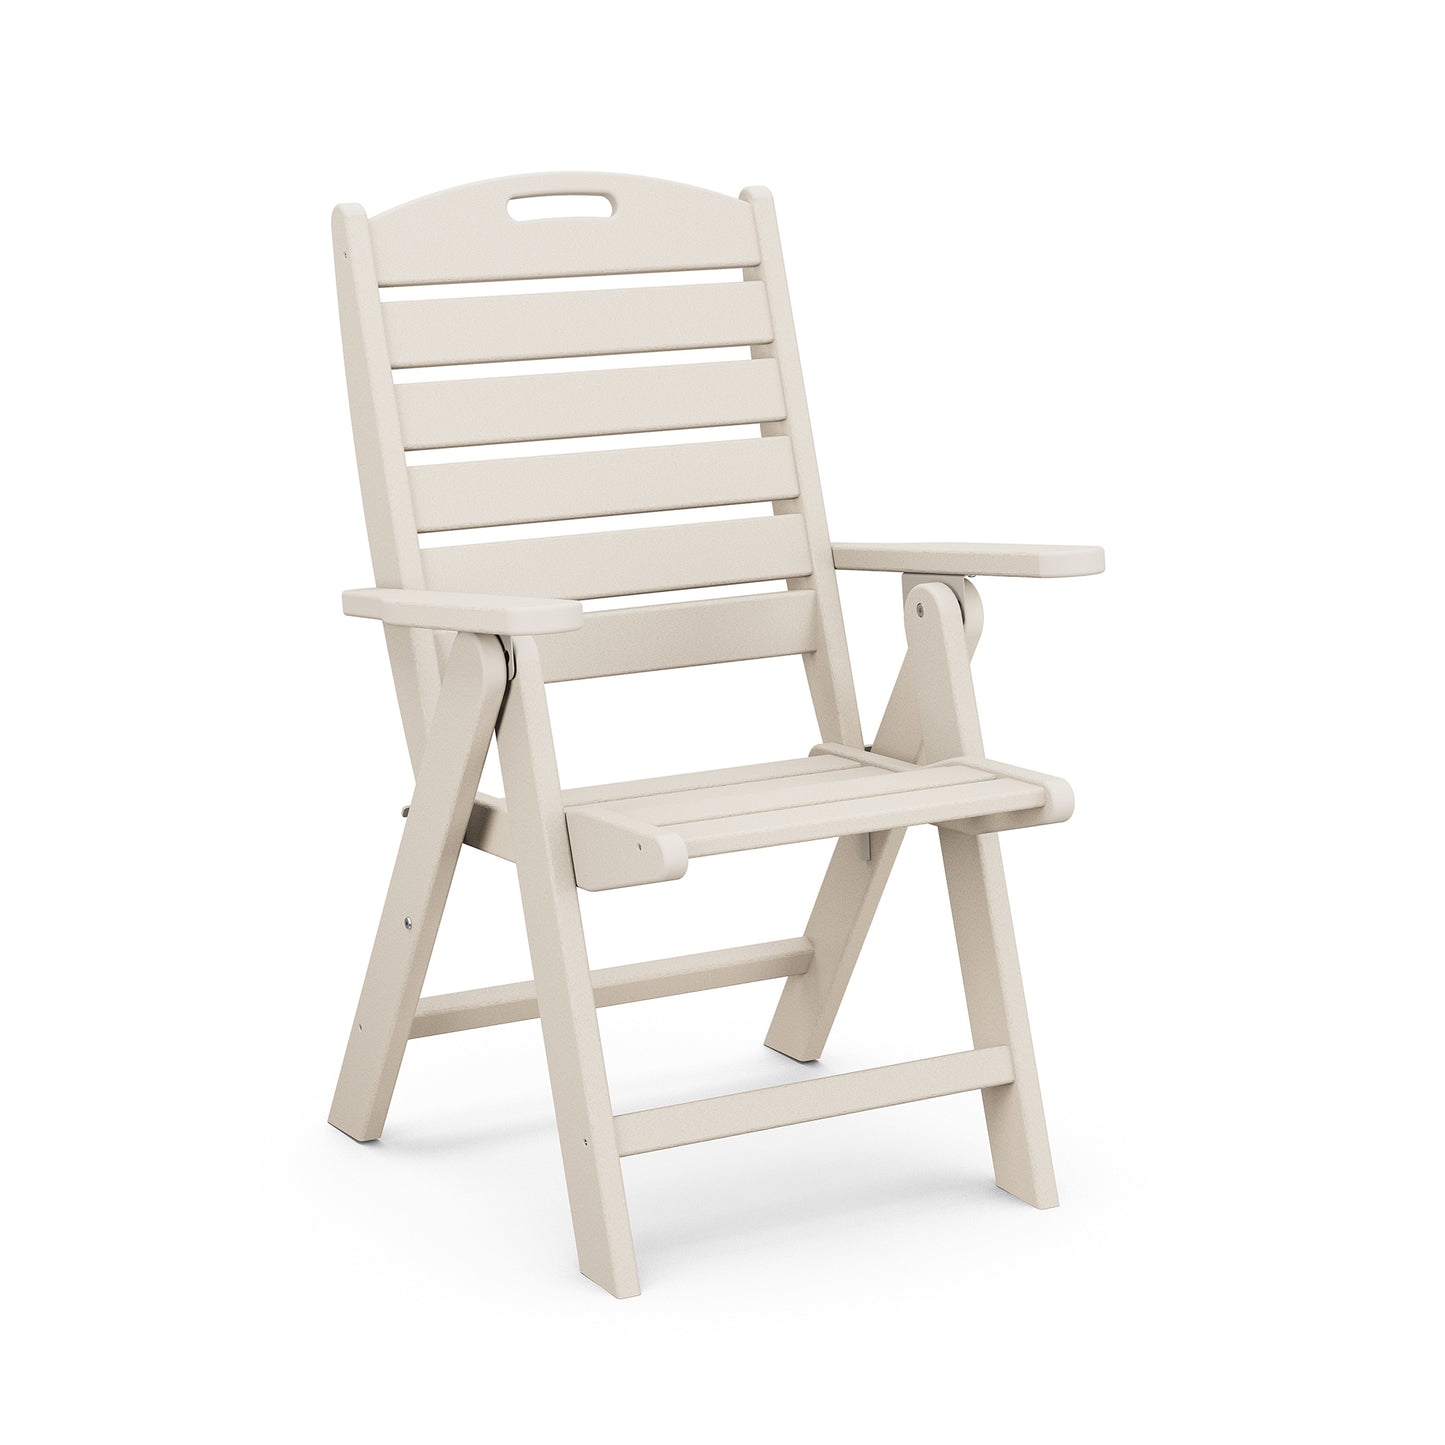 A beige POLYWOOD Nautical Highback Folding Dining Chair made of slatted recycled plastic, featuring armrests and a slightly curved back, set against a plain white background.